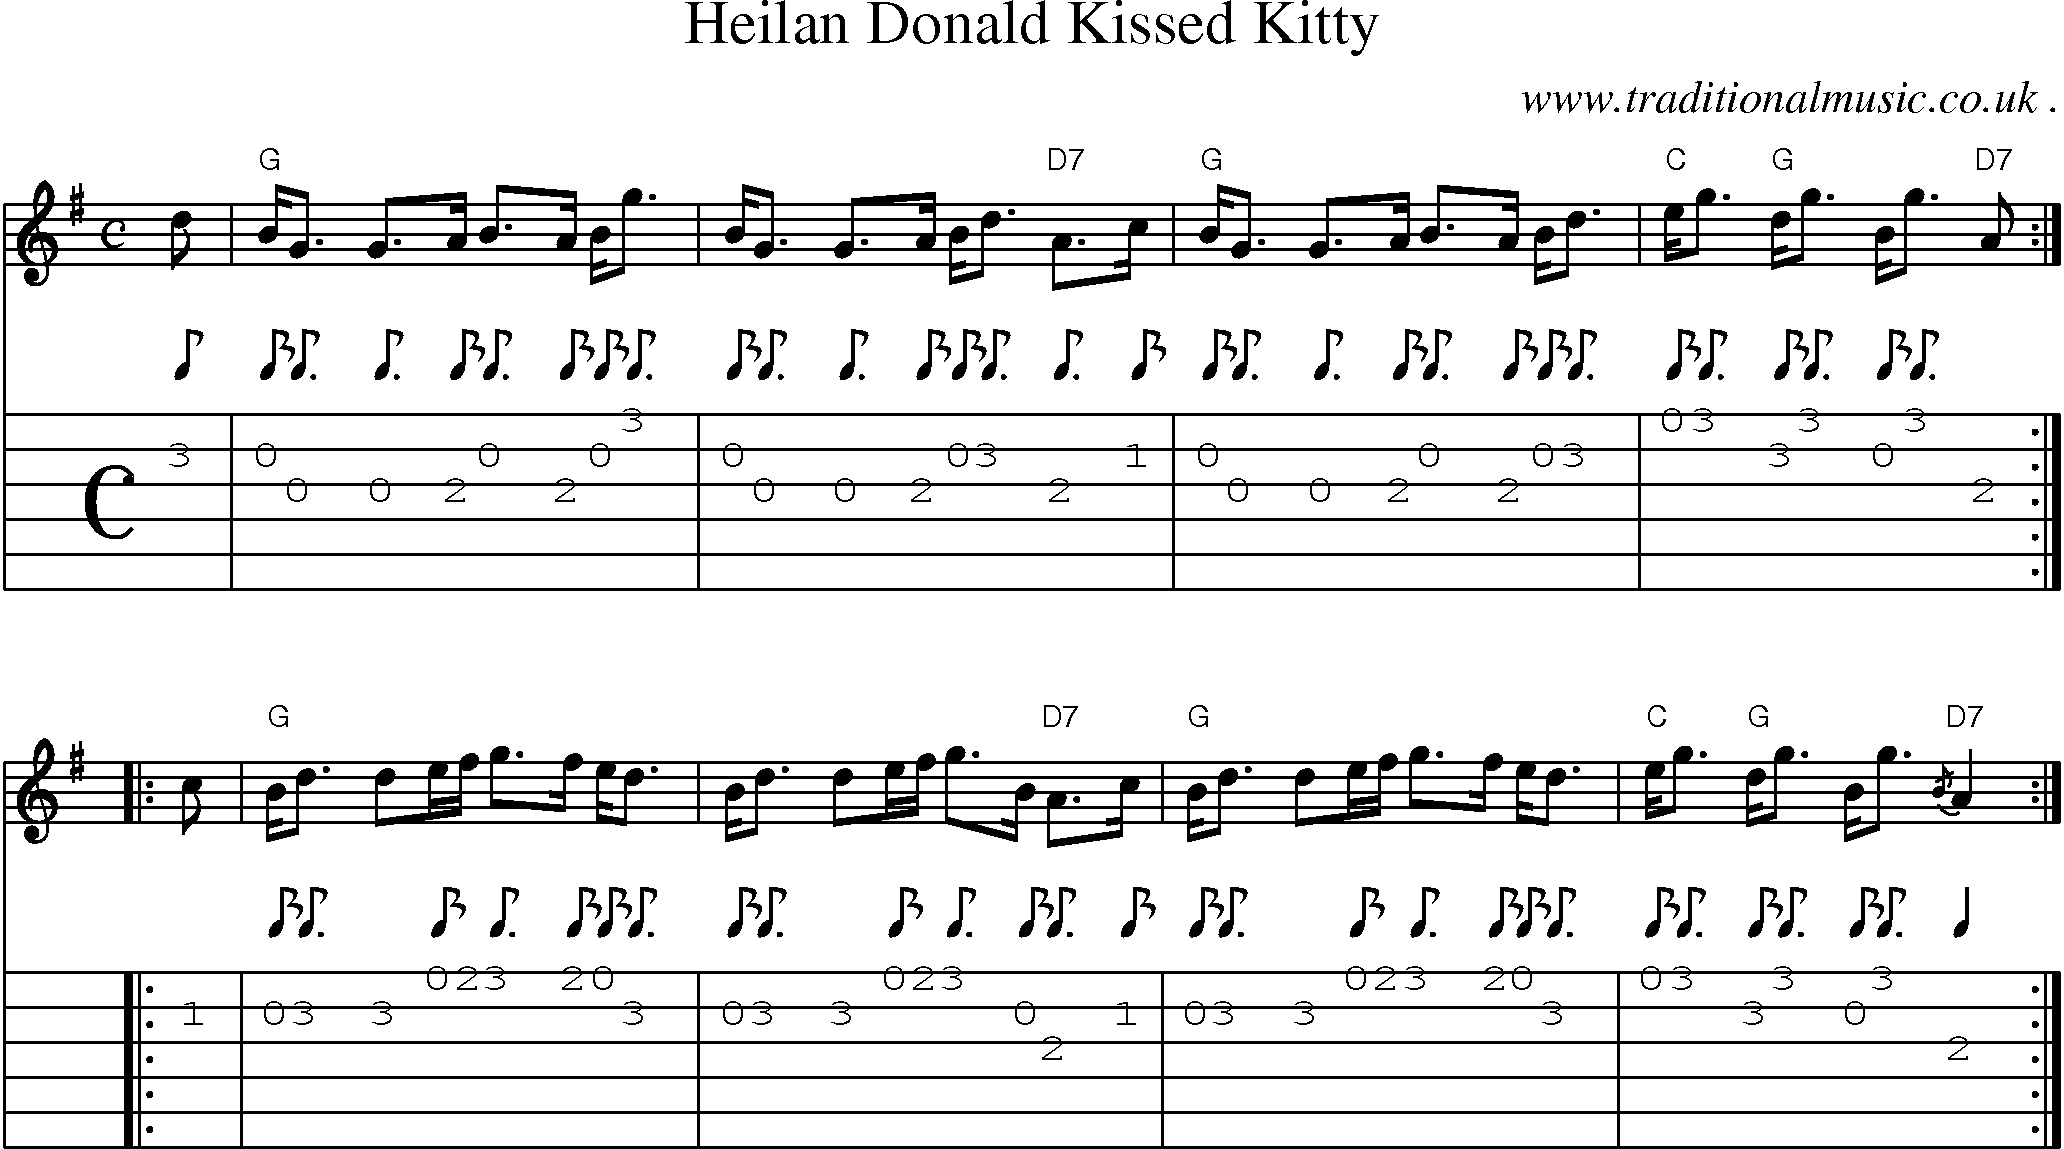 Sheet-music  score, Chords and Guitar Tabs for Heilan Donald Kissed Kitty